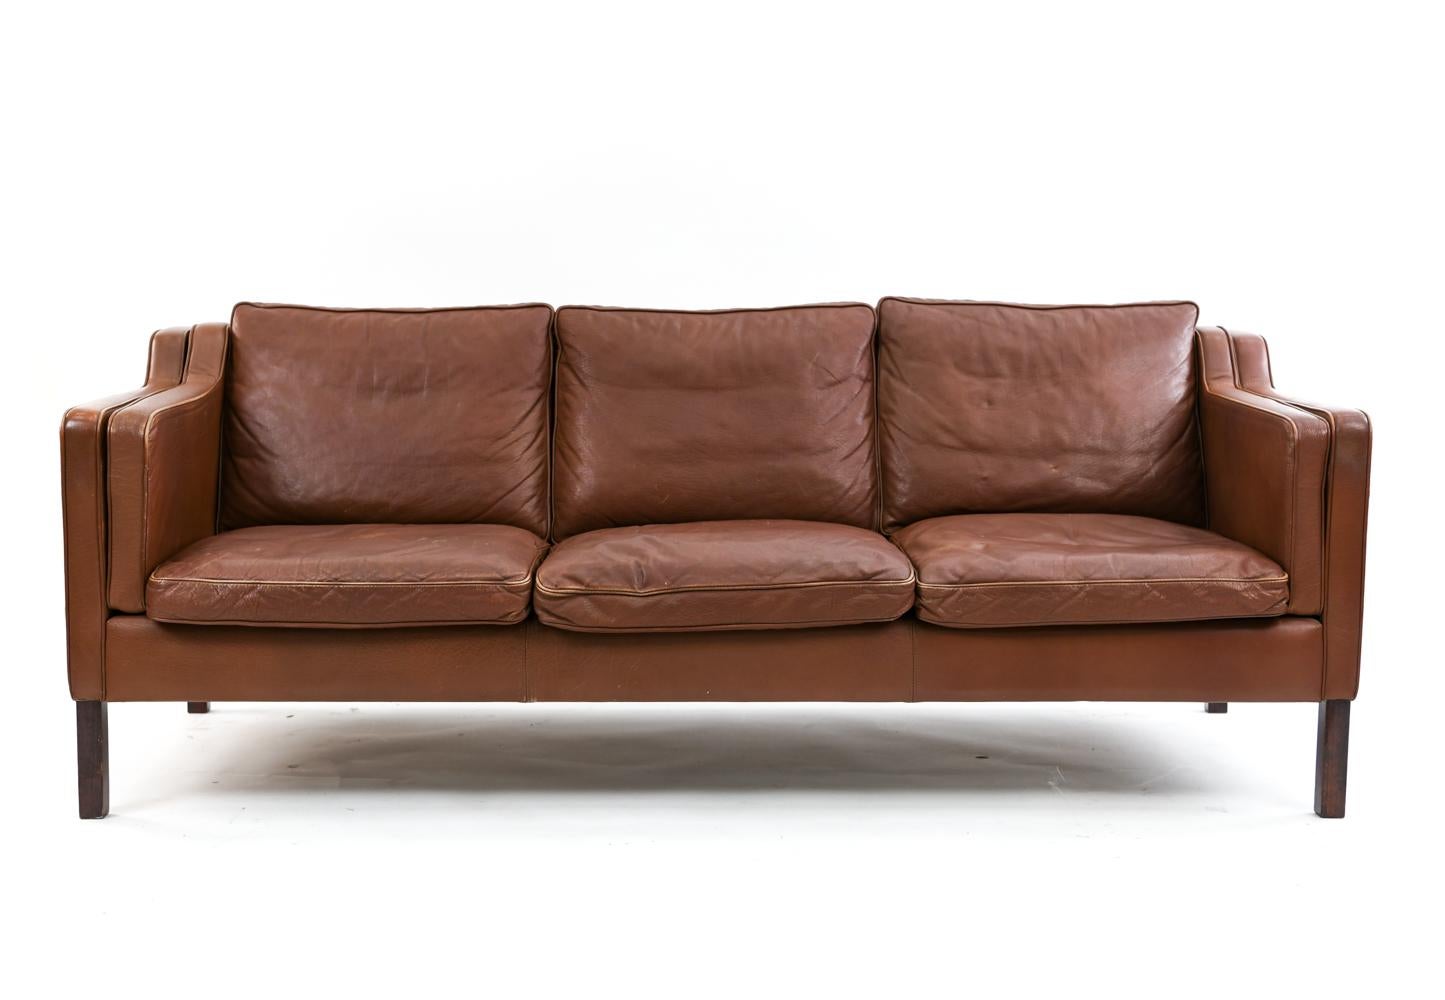 This Danish midcentury sofa was manufactured by Stouby. The design is in the manner of the iconic Borge Mogensen. This sofa is upholstered in attractively patinated brick colored leather and seats three comfortably.